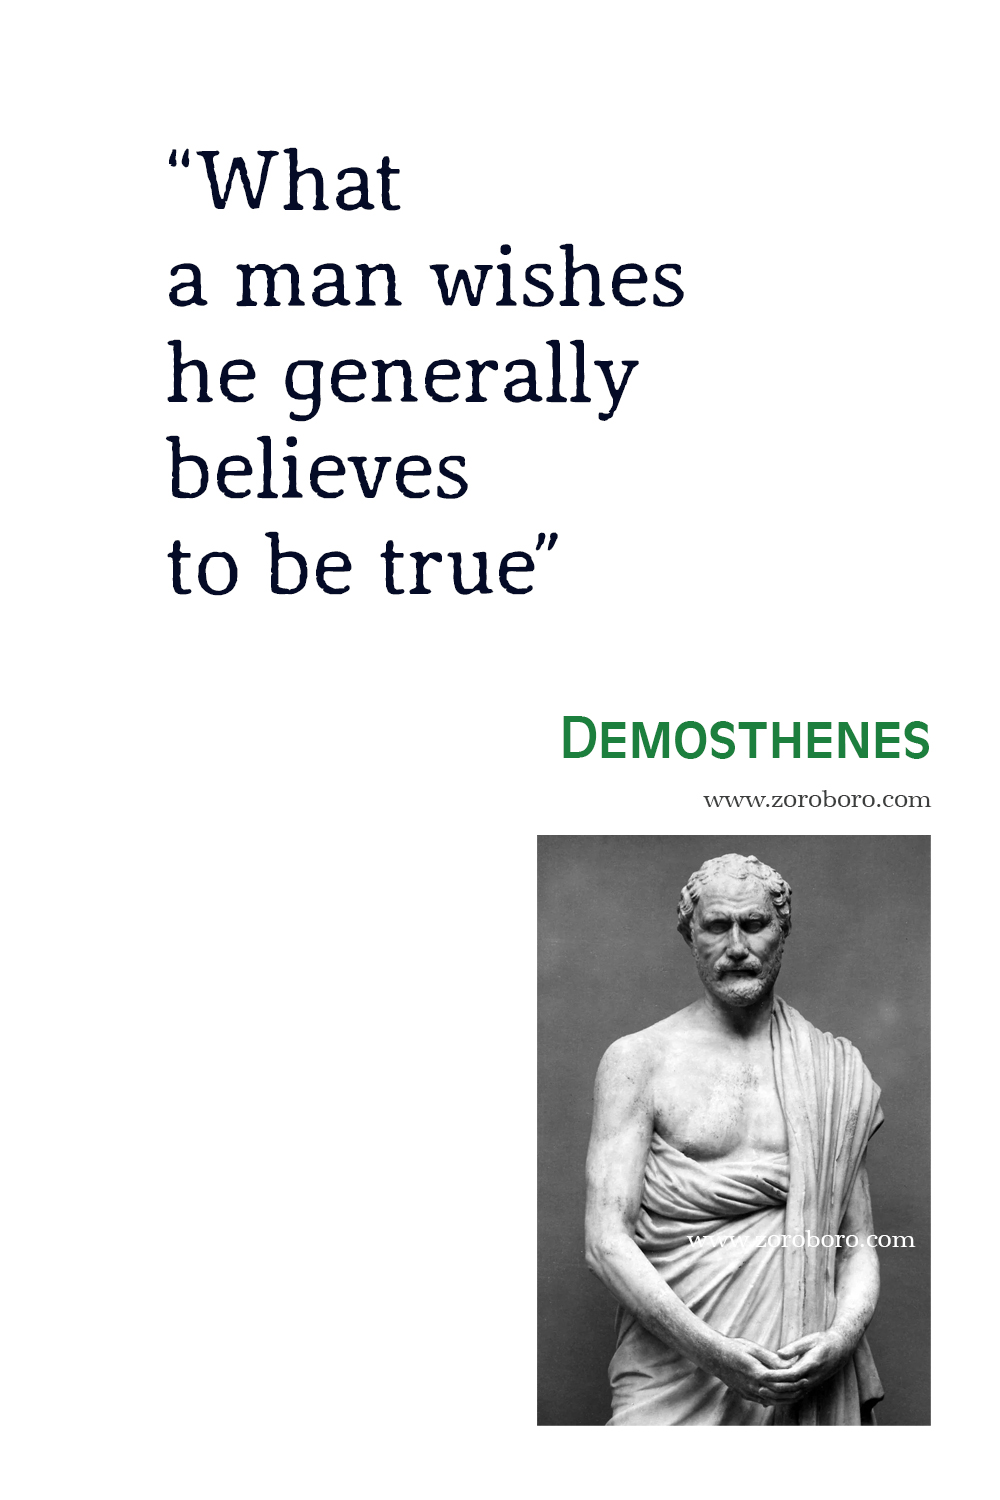 Demosthenes Quotes, Demosthenes Philosophy, Demosthenes Field Of Achievement, Demosthenes Photo, Demosthenes Theory, Nature of Challenge.